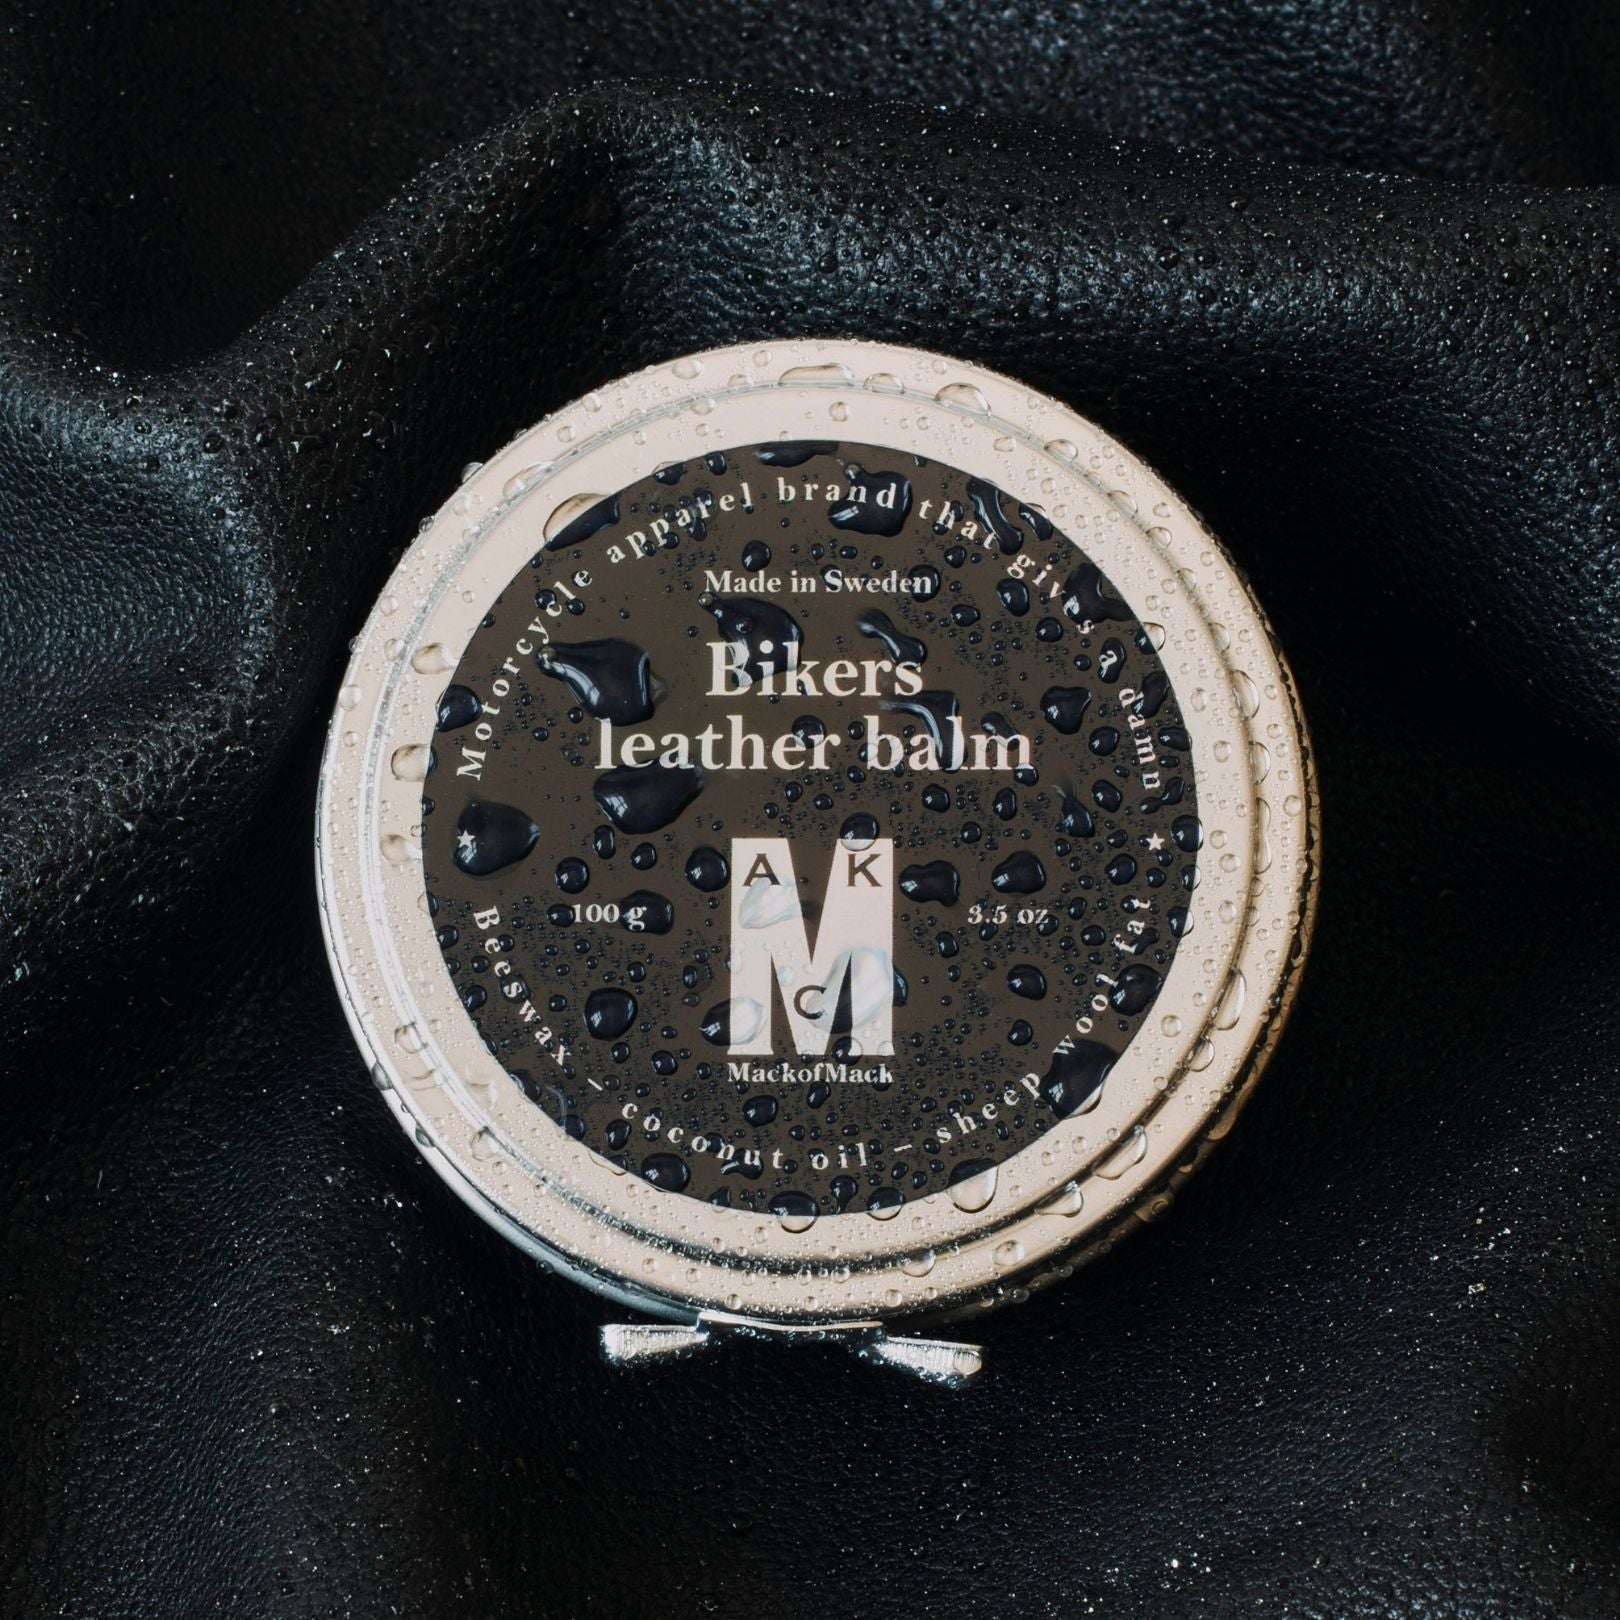 Bikers Leather Balm. All-natural leather protection and conditioner . Made in Sweden.  If you are looking for best boot waterproofing wax or best leather balsam - look no more. MackofMack Bikers Leather Balm will be your best friend for you  boots or jacket. Mack of Mack